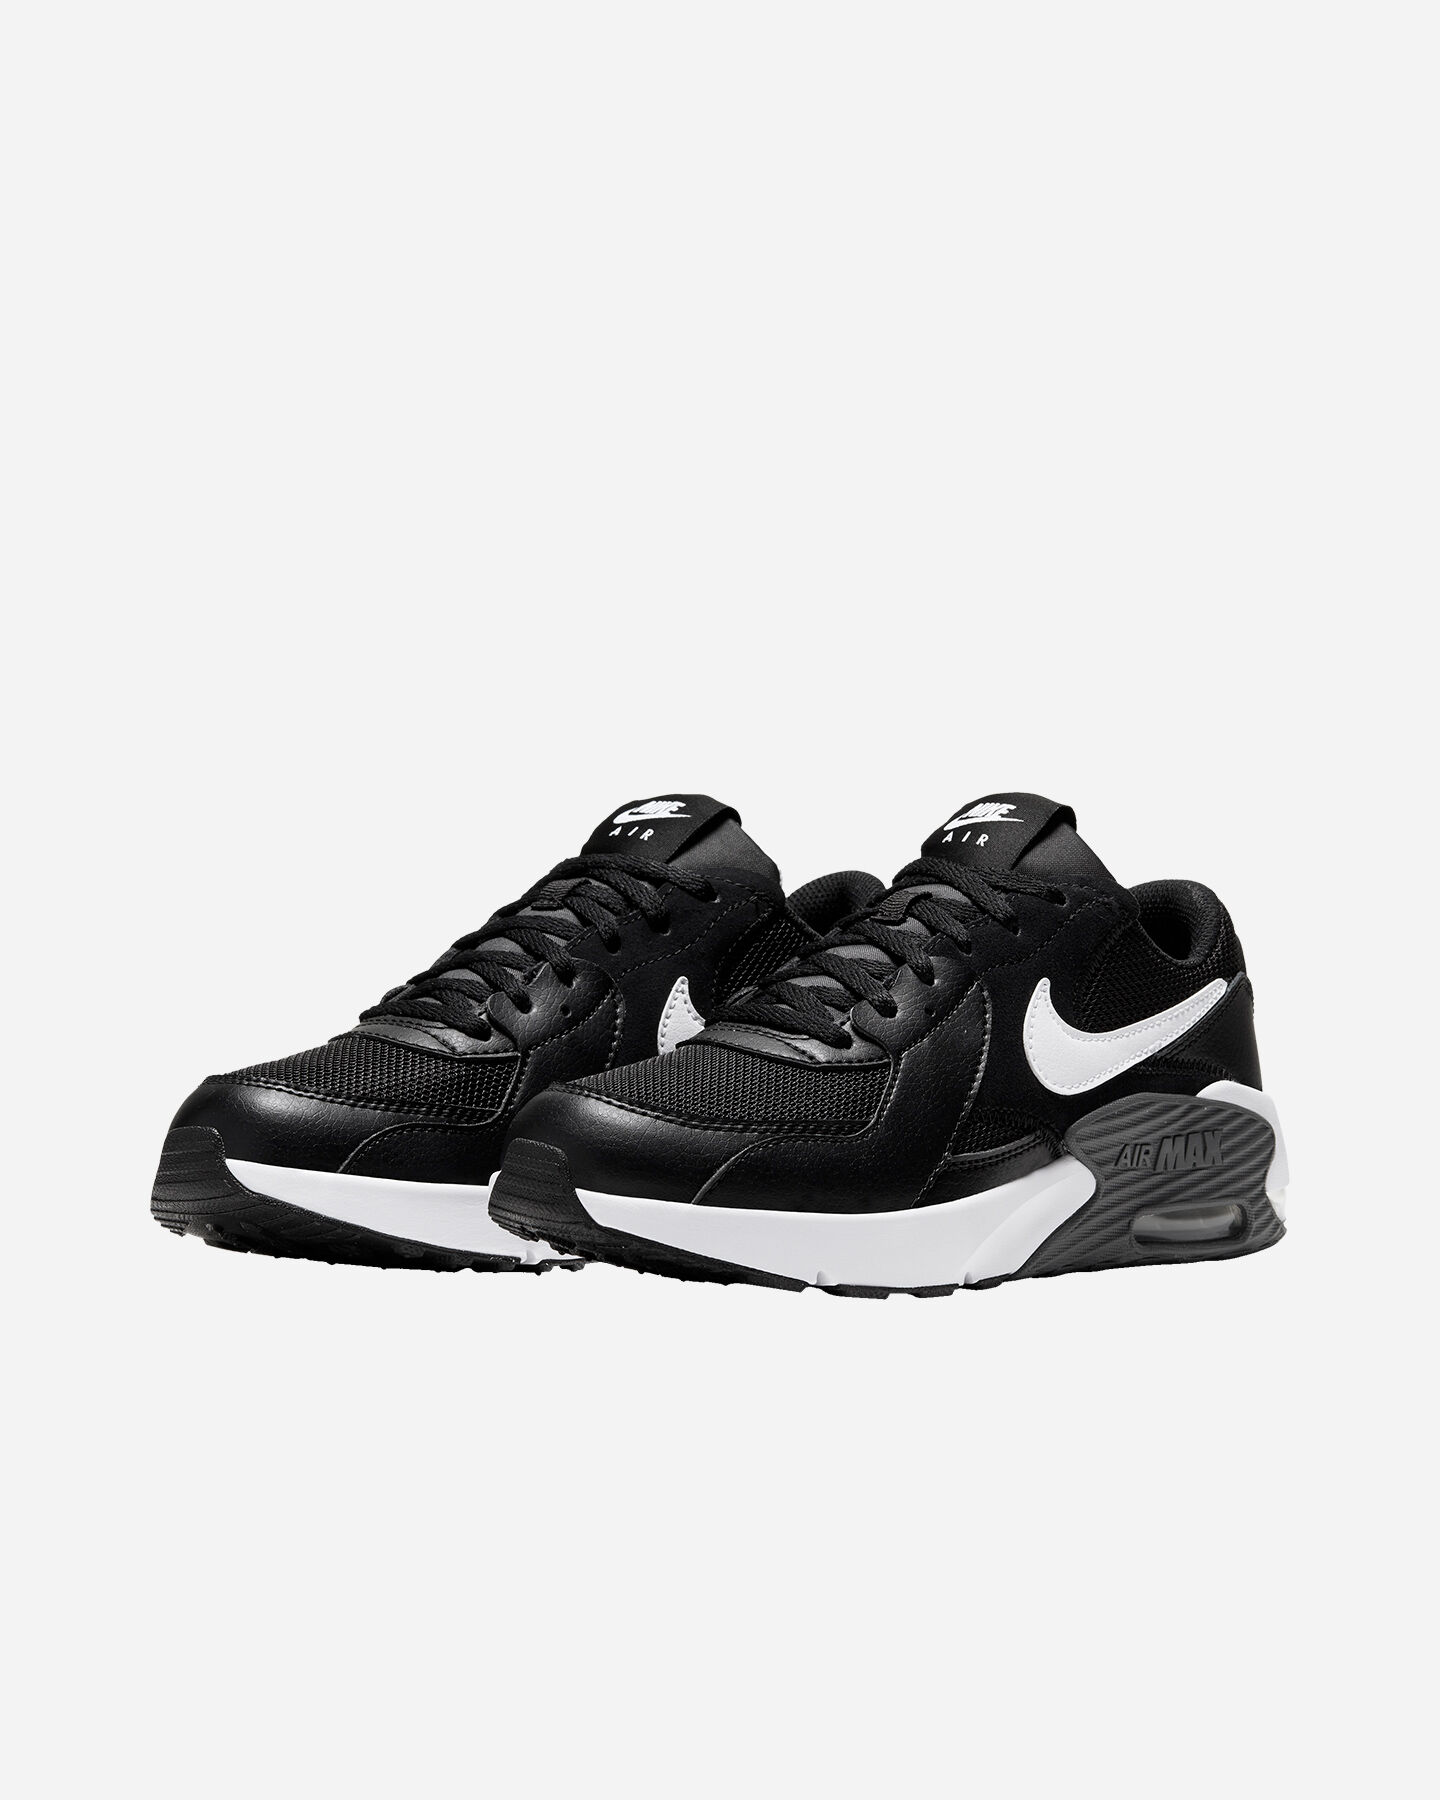  Scarpe sneakers NIKE AIR MAX EXCEE GS JR S5162124|001|4Y scatto 1